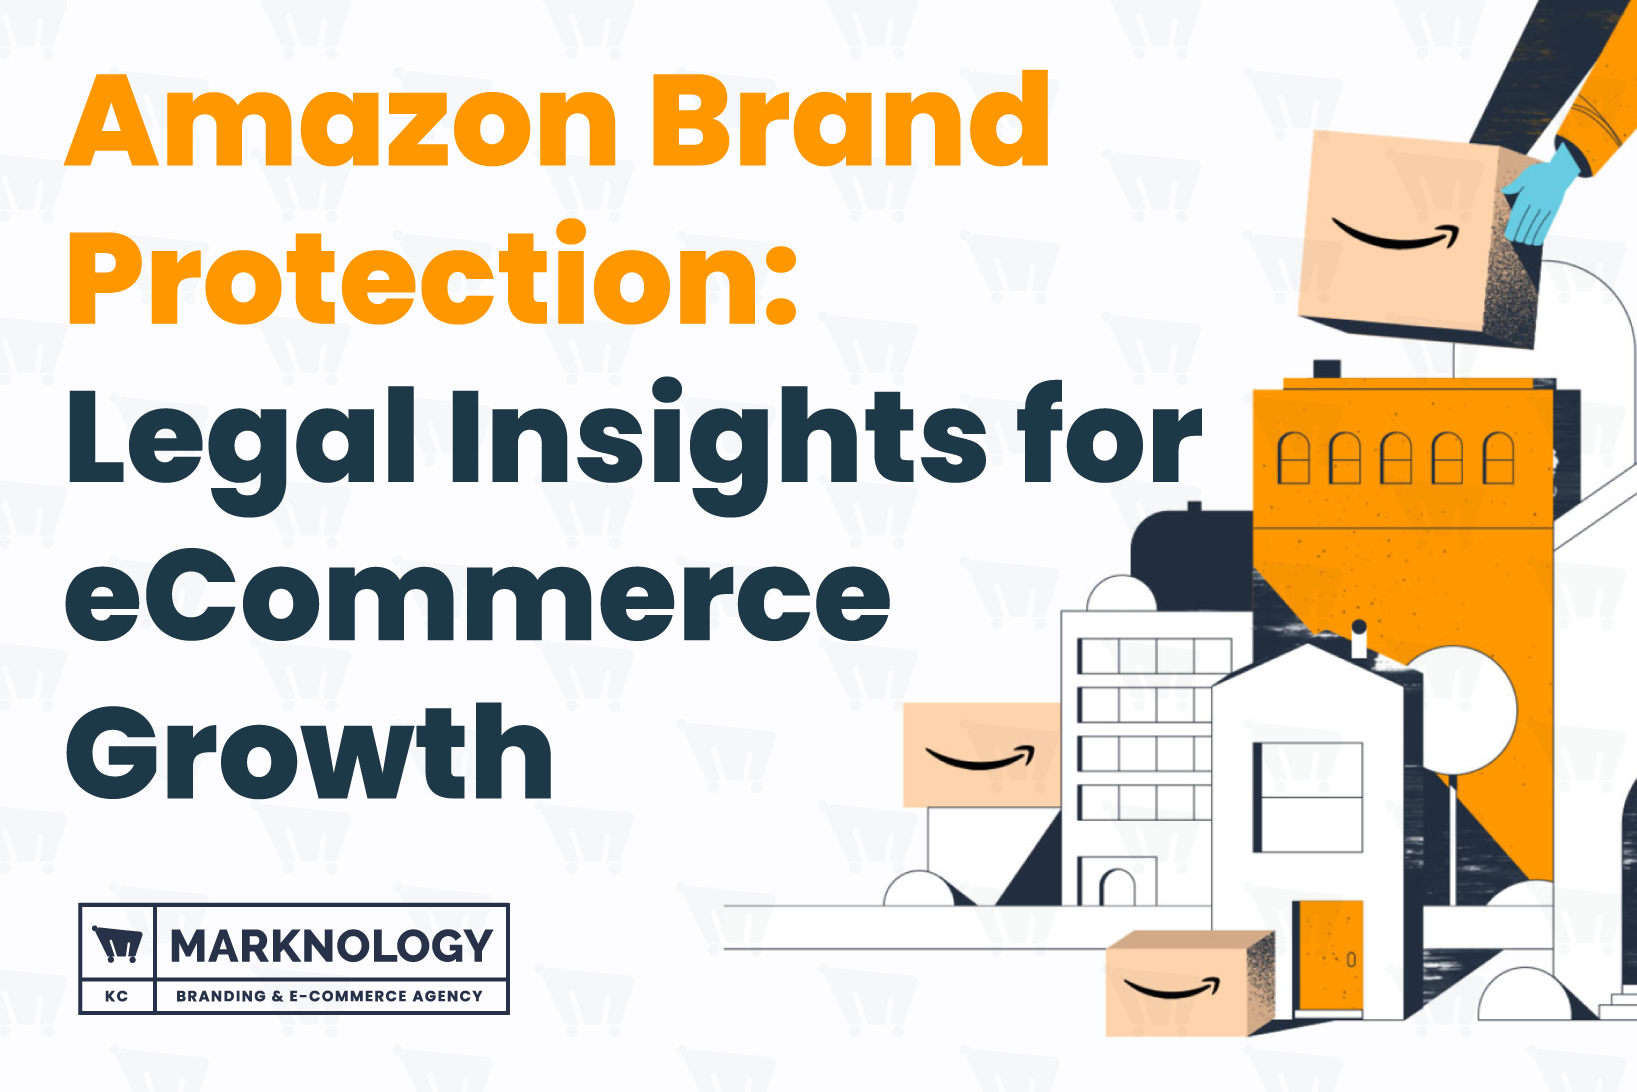 Amazon Brand Protection: Legal Insights for eCommerce Growth